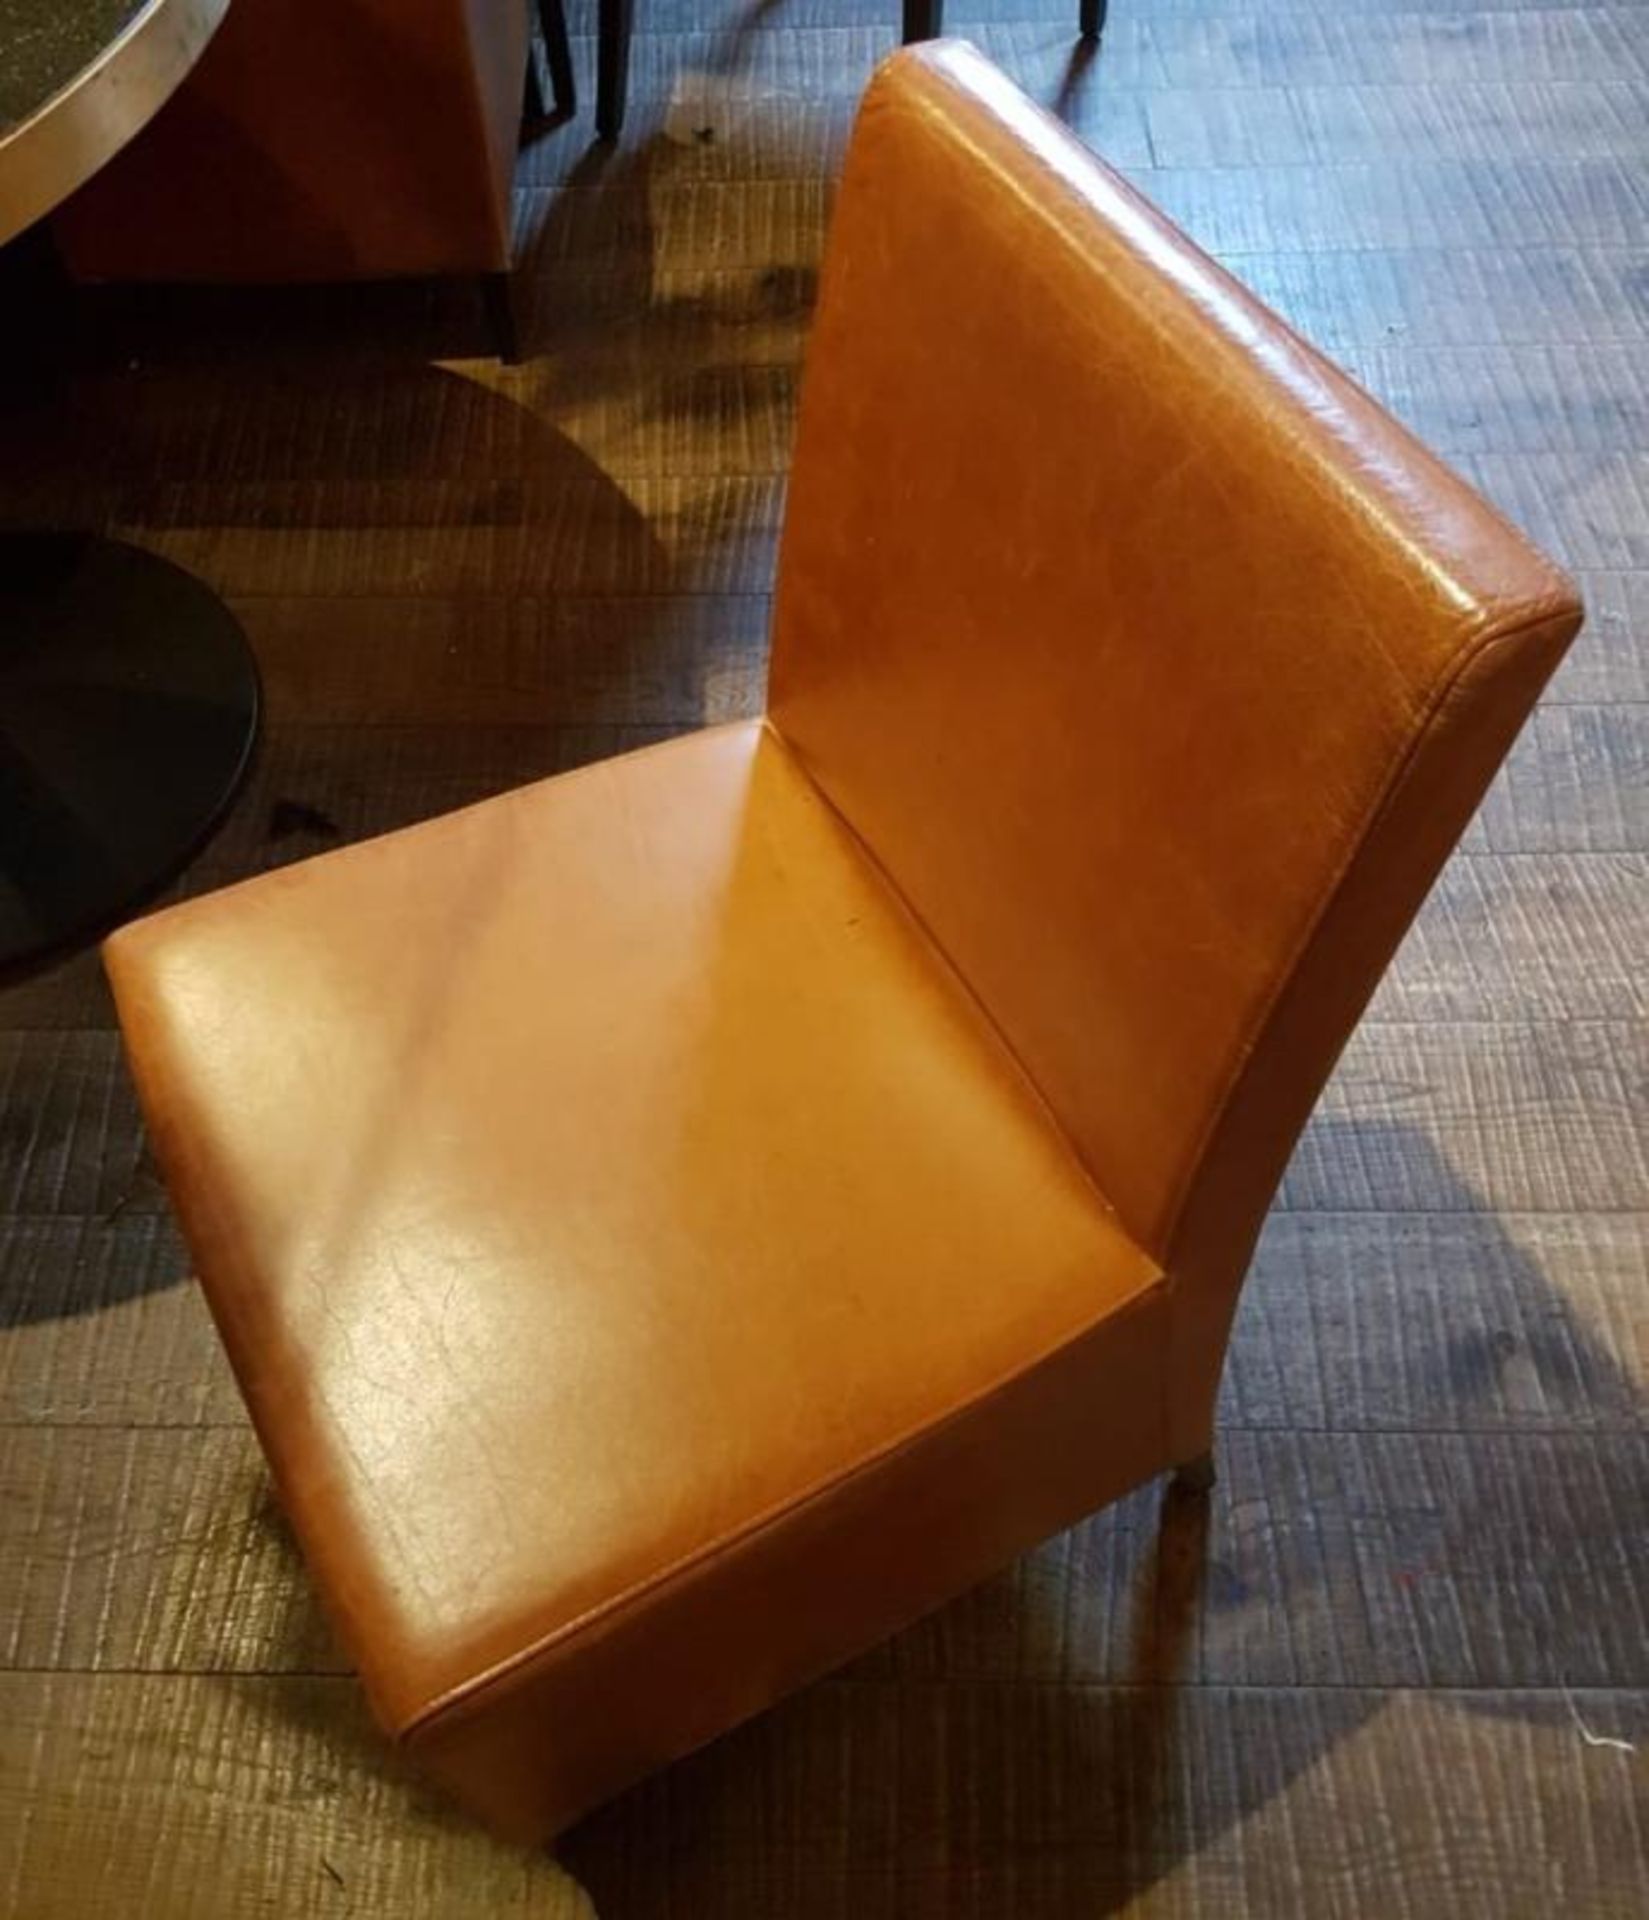 4 x Leather Upholstered Chairs In Tan - Recently Removed From A City Centre Steakhouse Restaurant - - Image 4 of 6